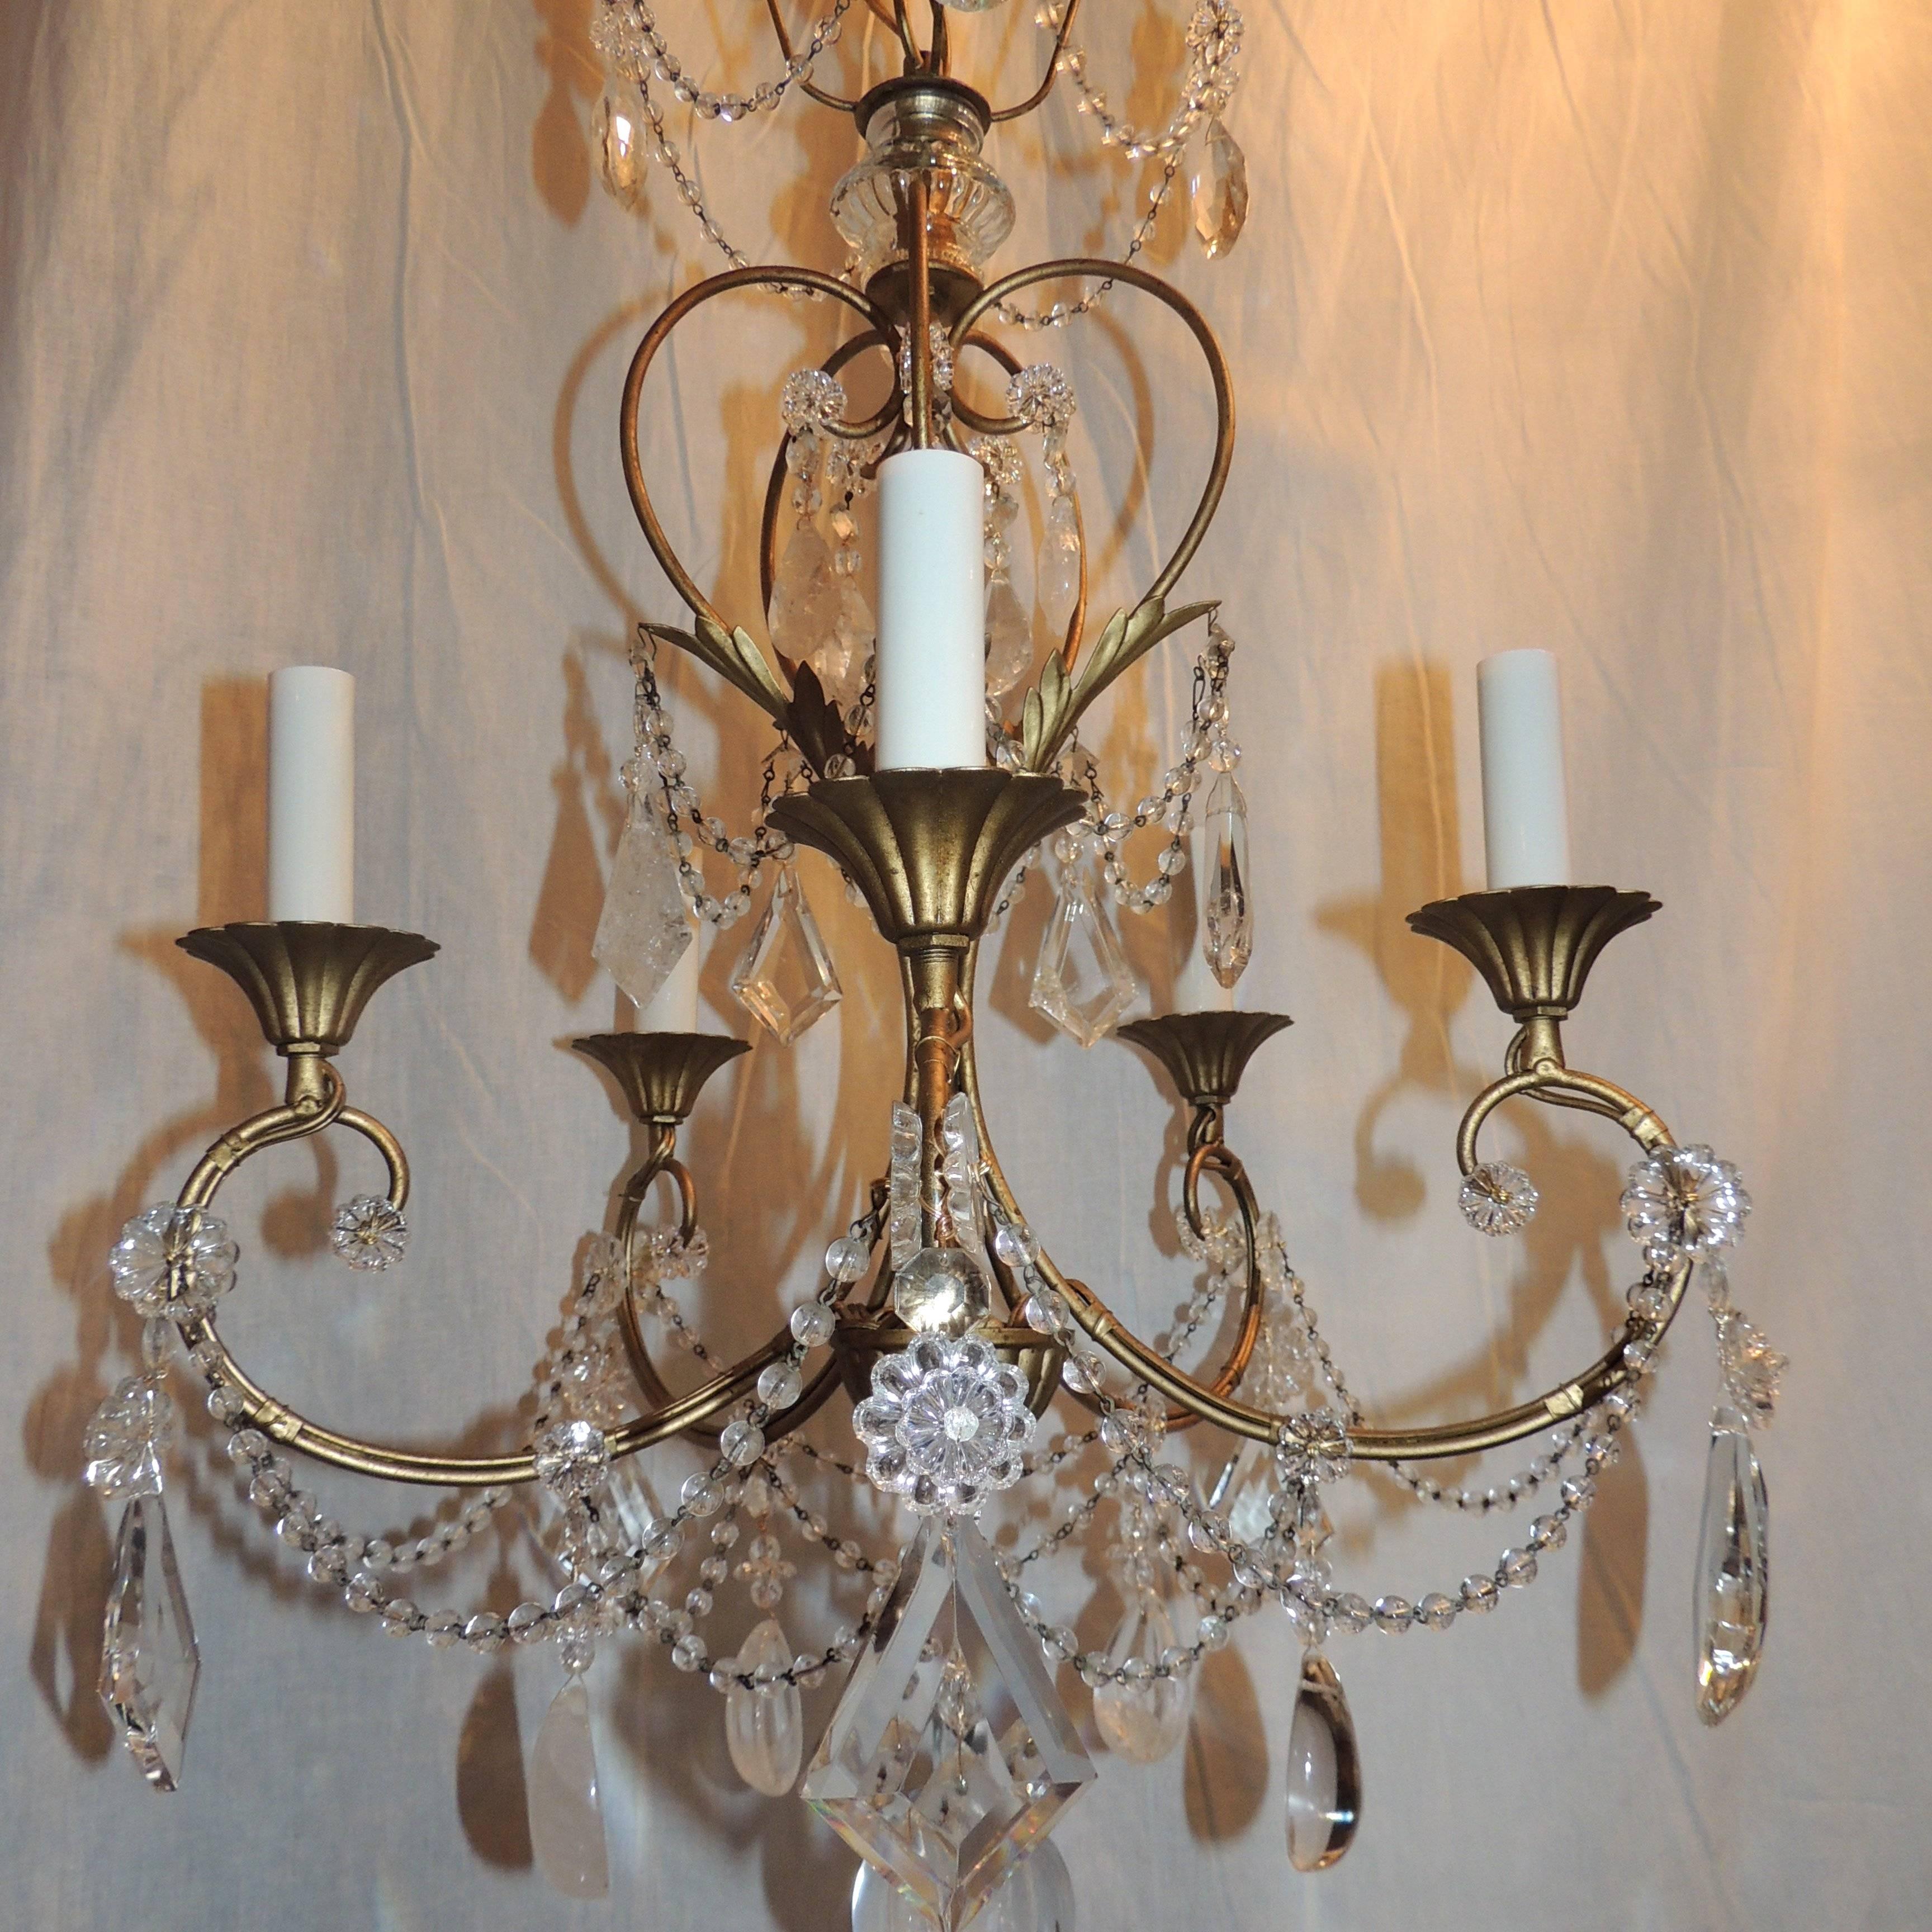 Wonderful Transitional Gilt Rock Crystal 5-Arm Baguès Chandelier Jansen Fixture In Good Condition For Sale In Roslyn, NY